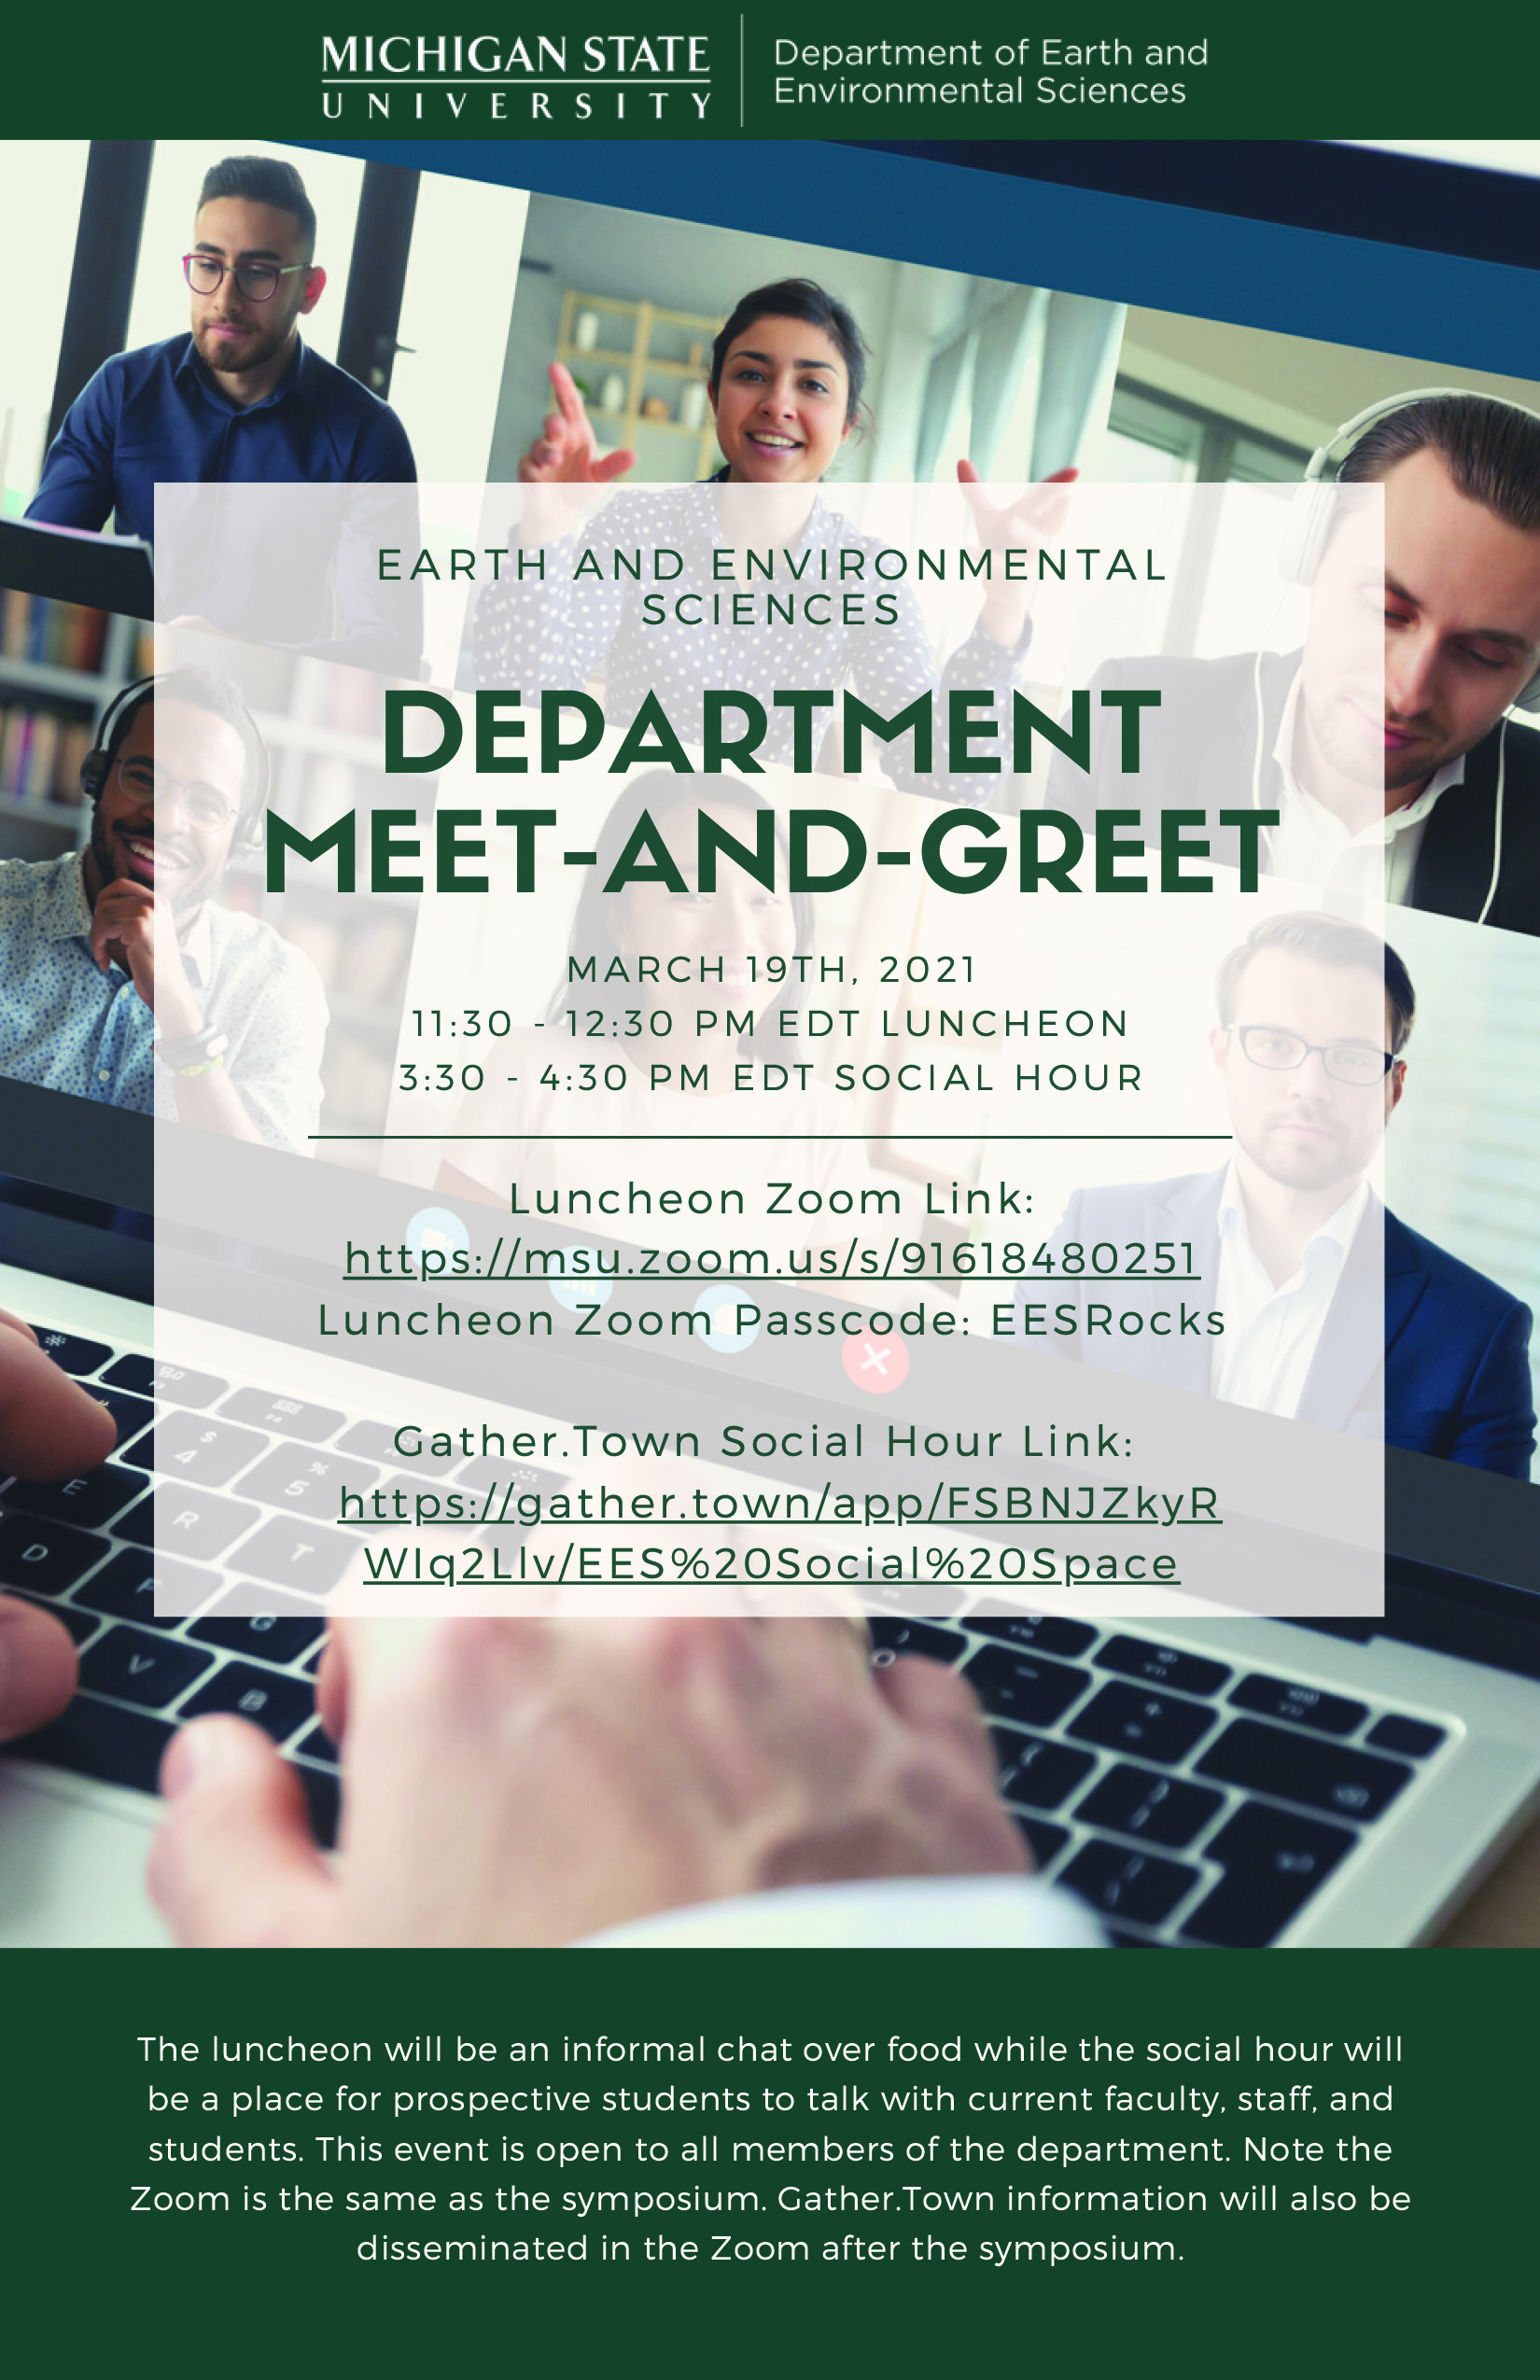 March 19th Meet and Greet Flyer